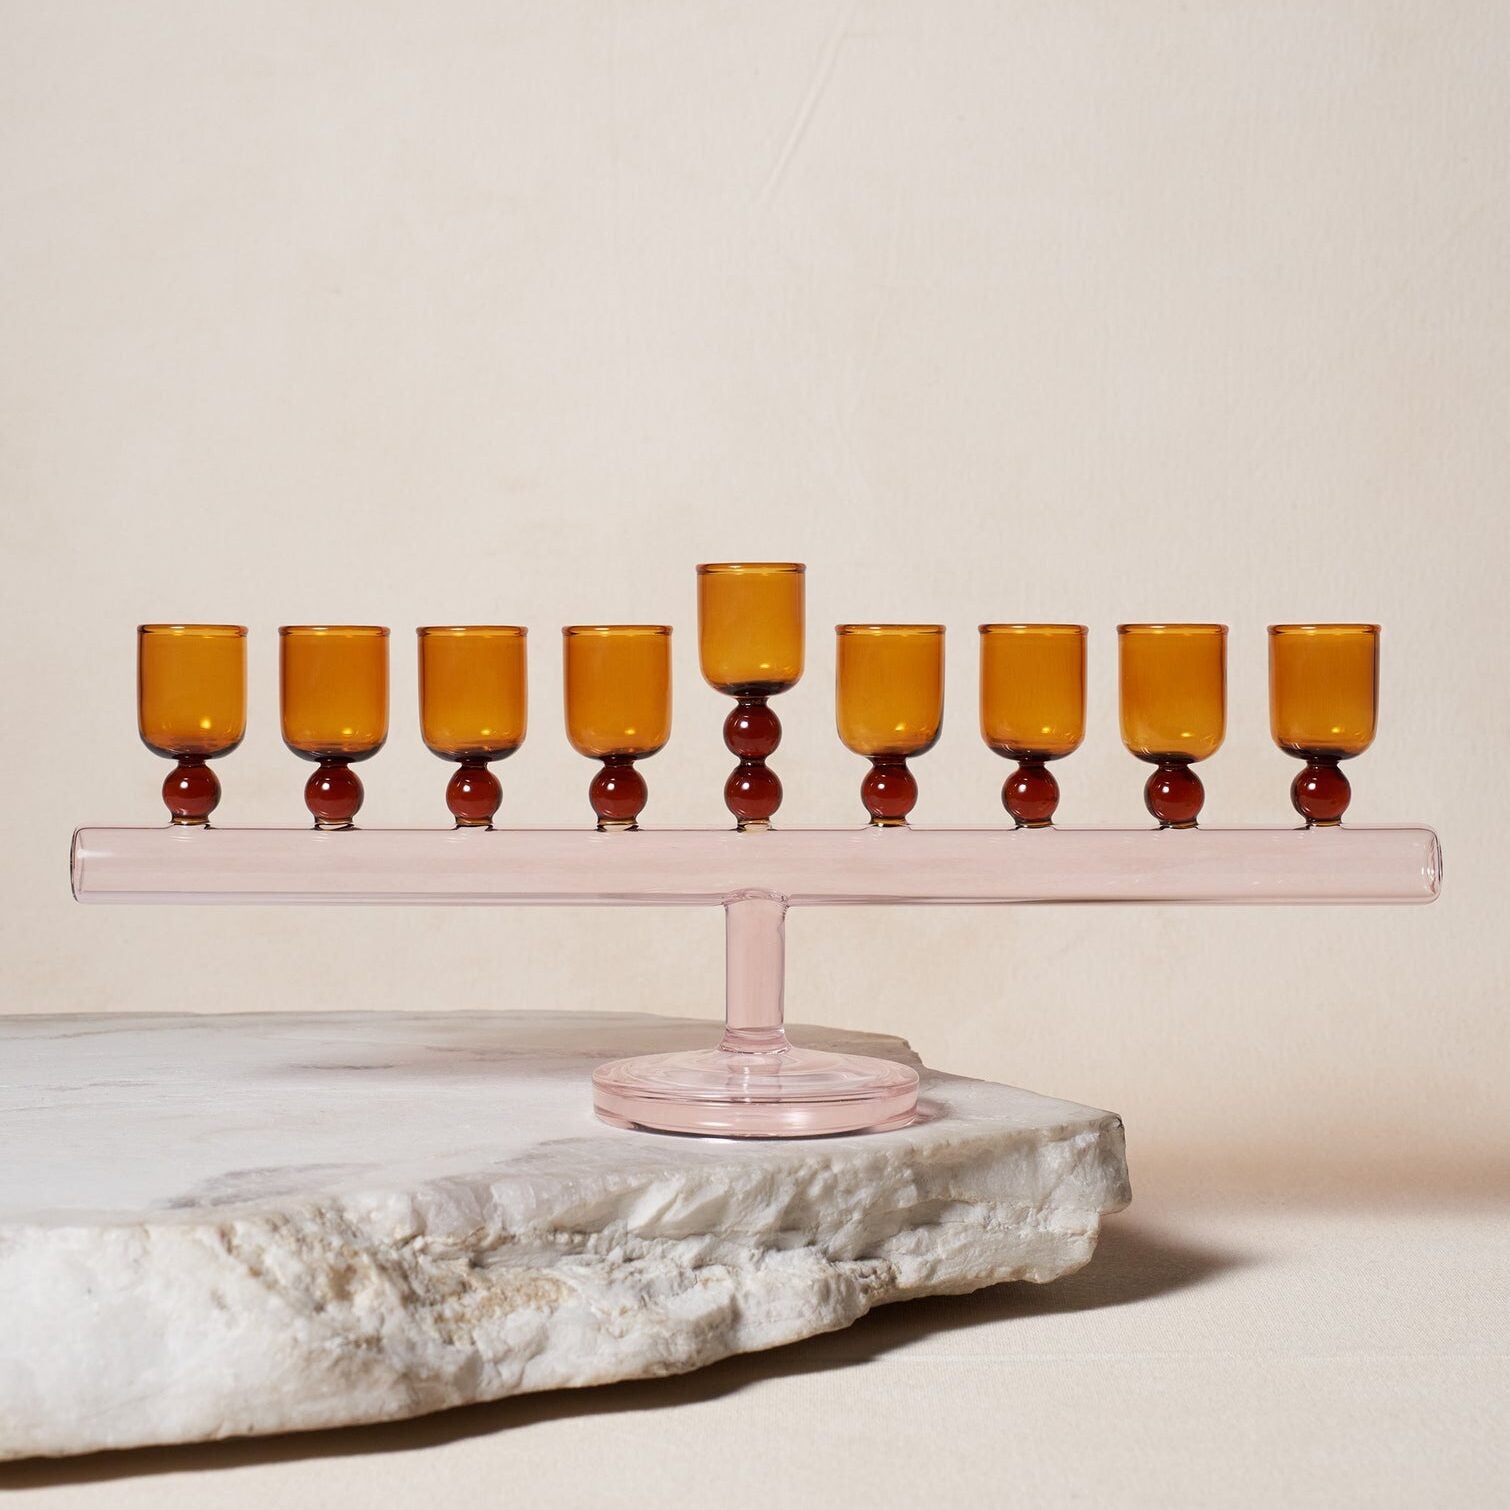 The Best Hanukkah Menorahs Celebrate the Materials of the Moment, From Travertine to Brass